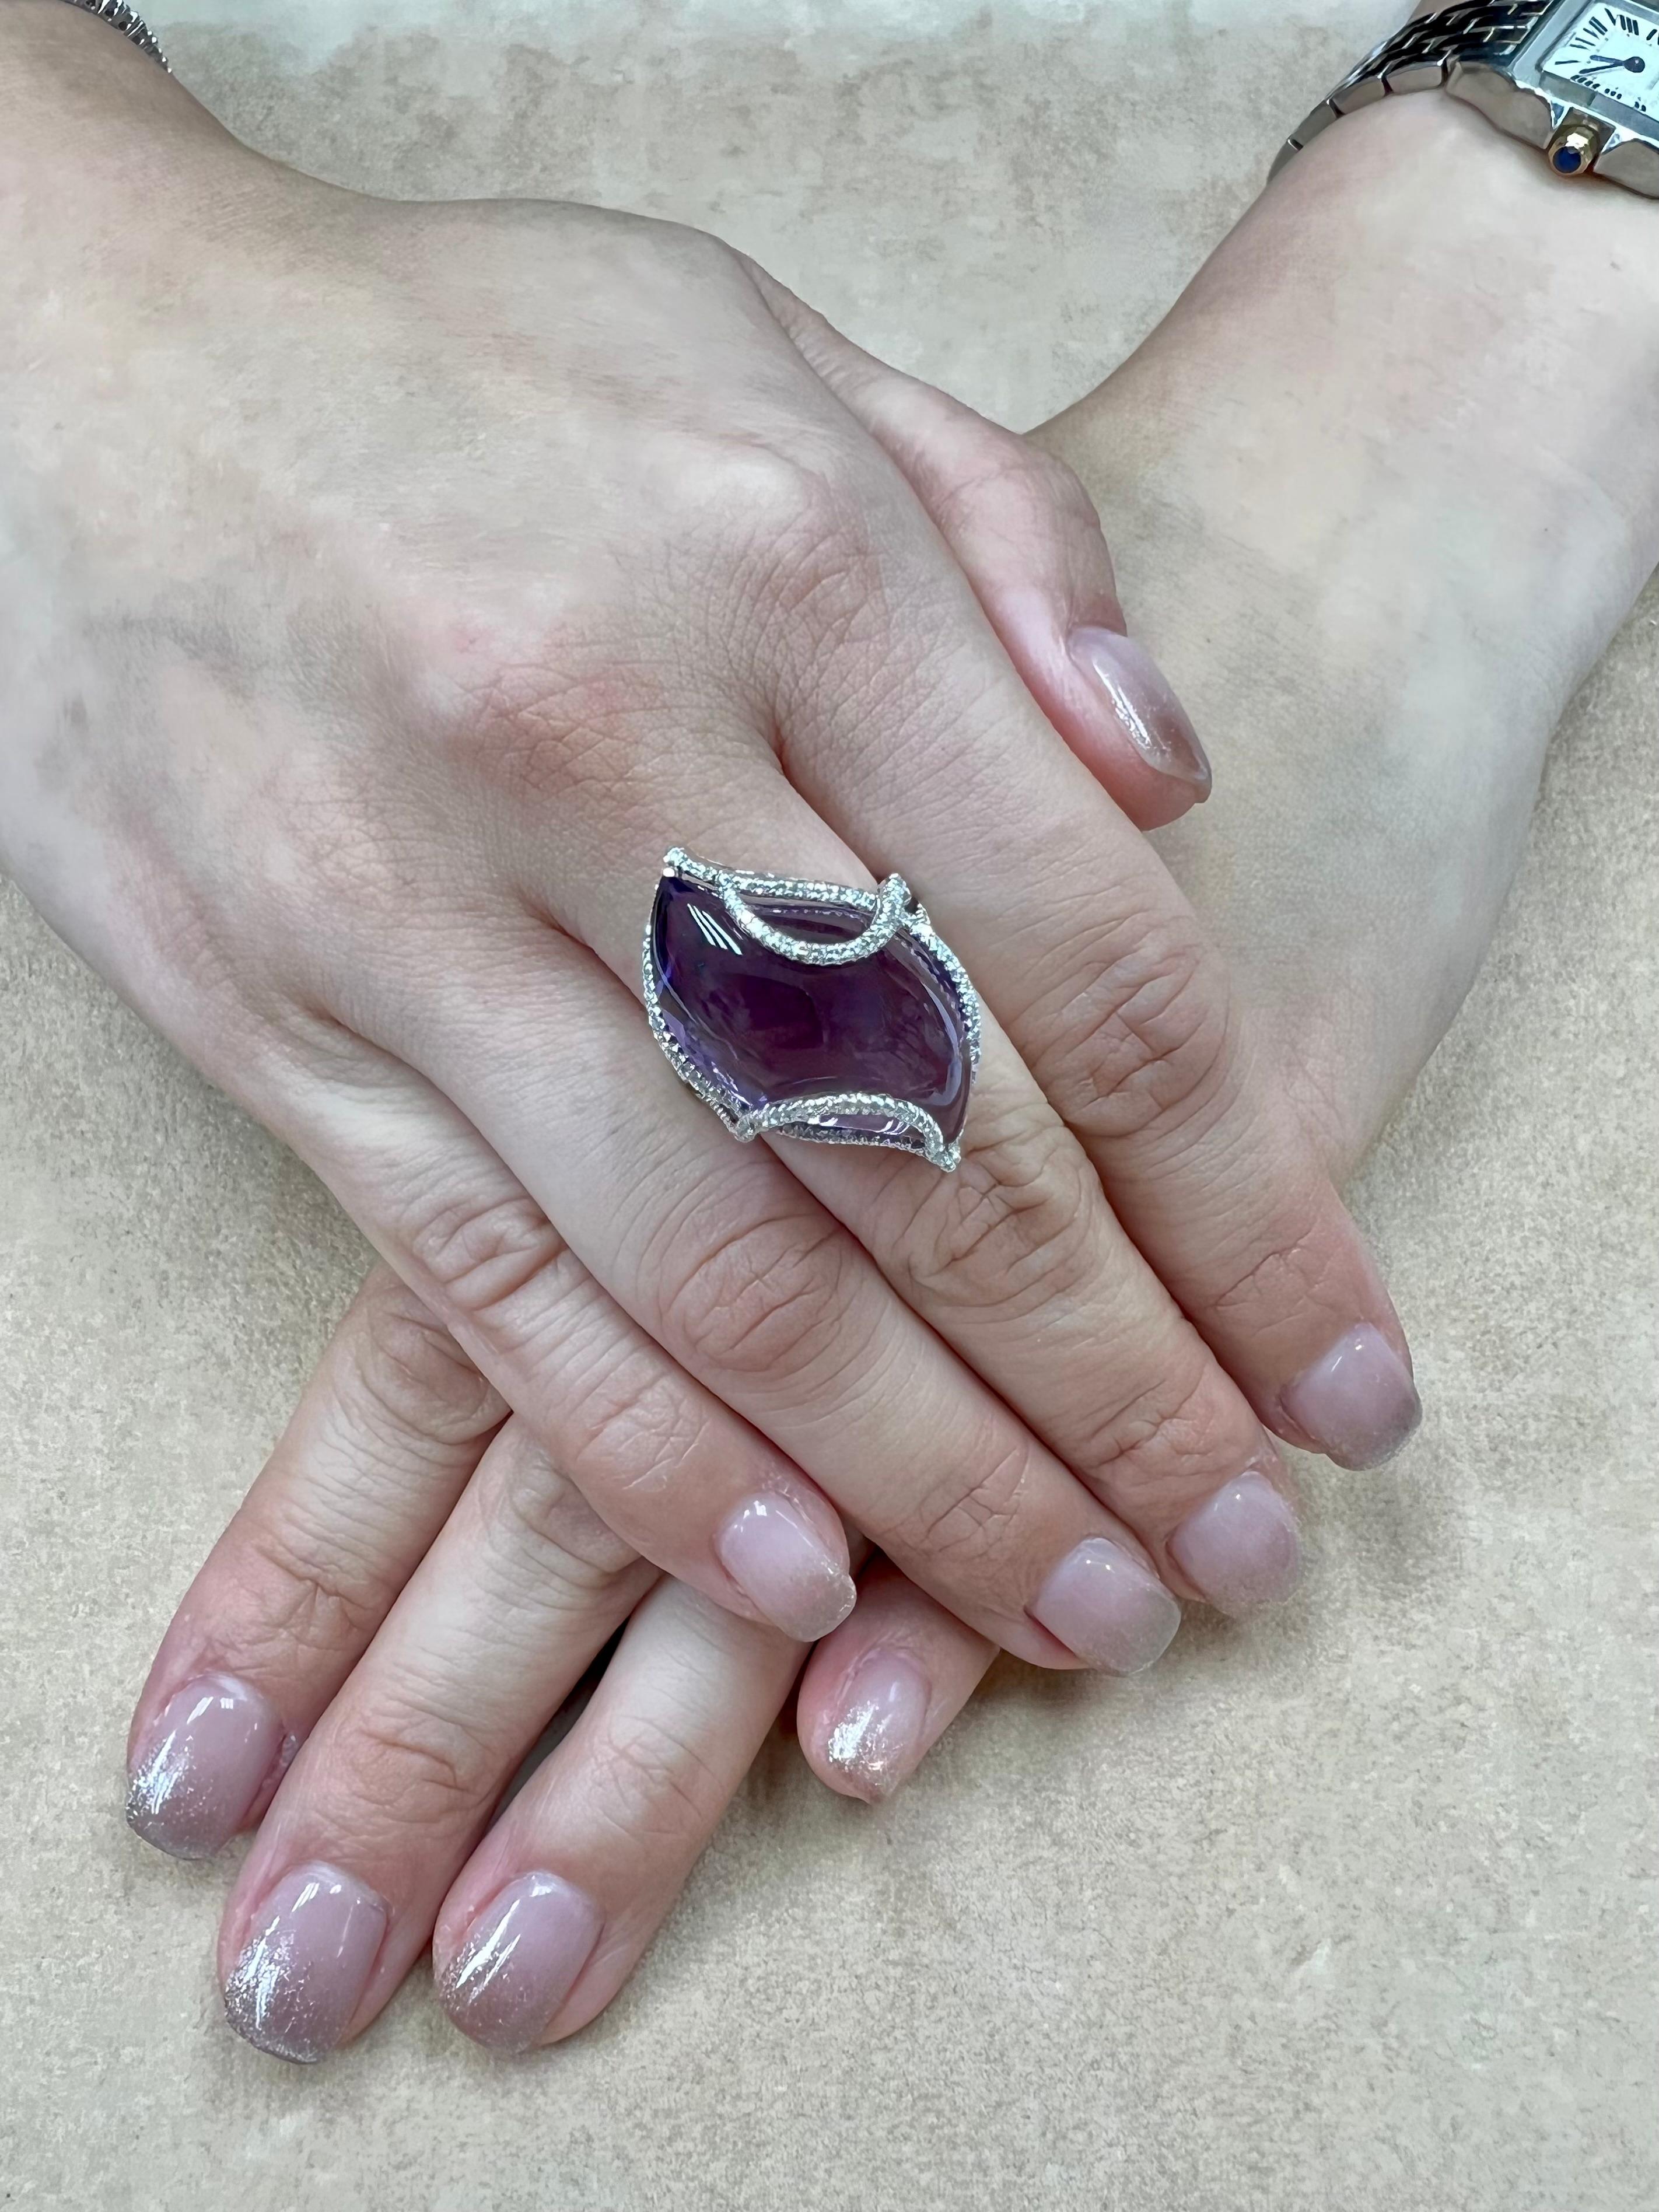 Please check out the HD video! Here is a super unique Amethyst and diamond cocktail statement ring. It is set in 18k white gold and diamonds. The XL 23.25 cts center amethyst is stunning. The violet-purple color shifts from light to dark depending